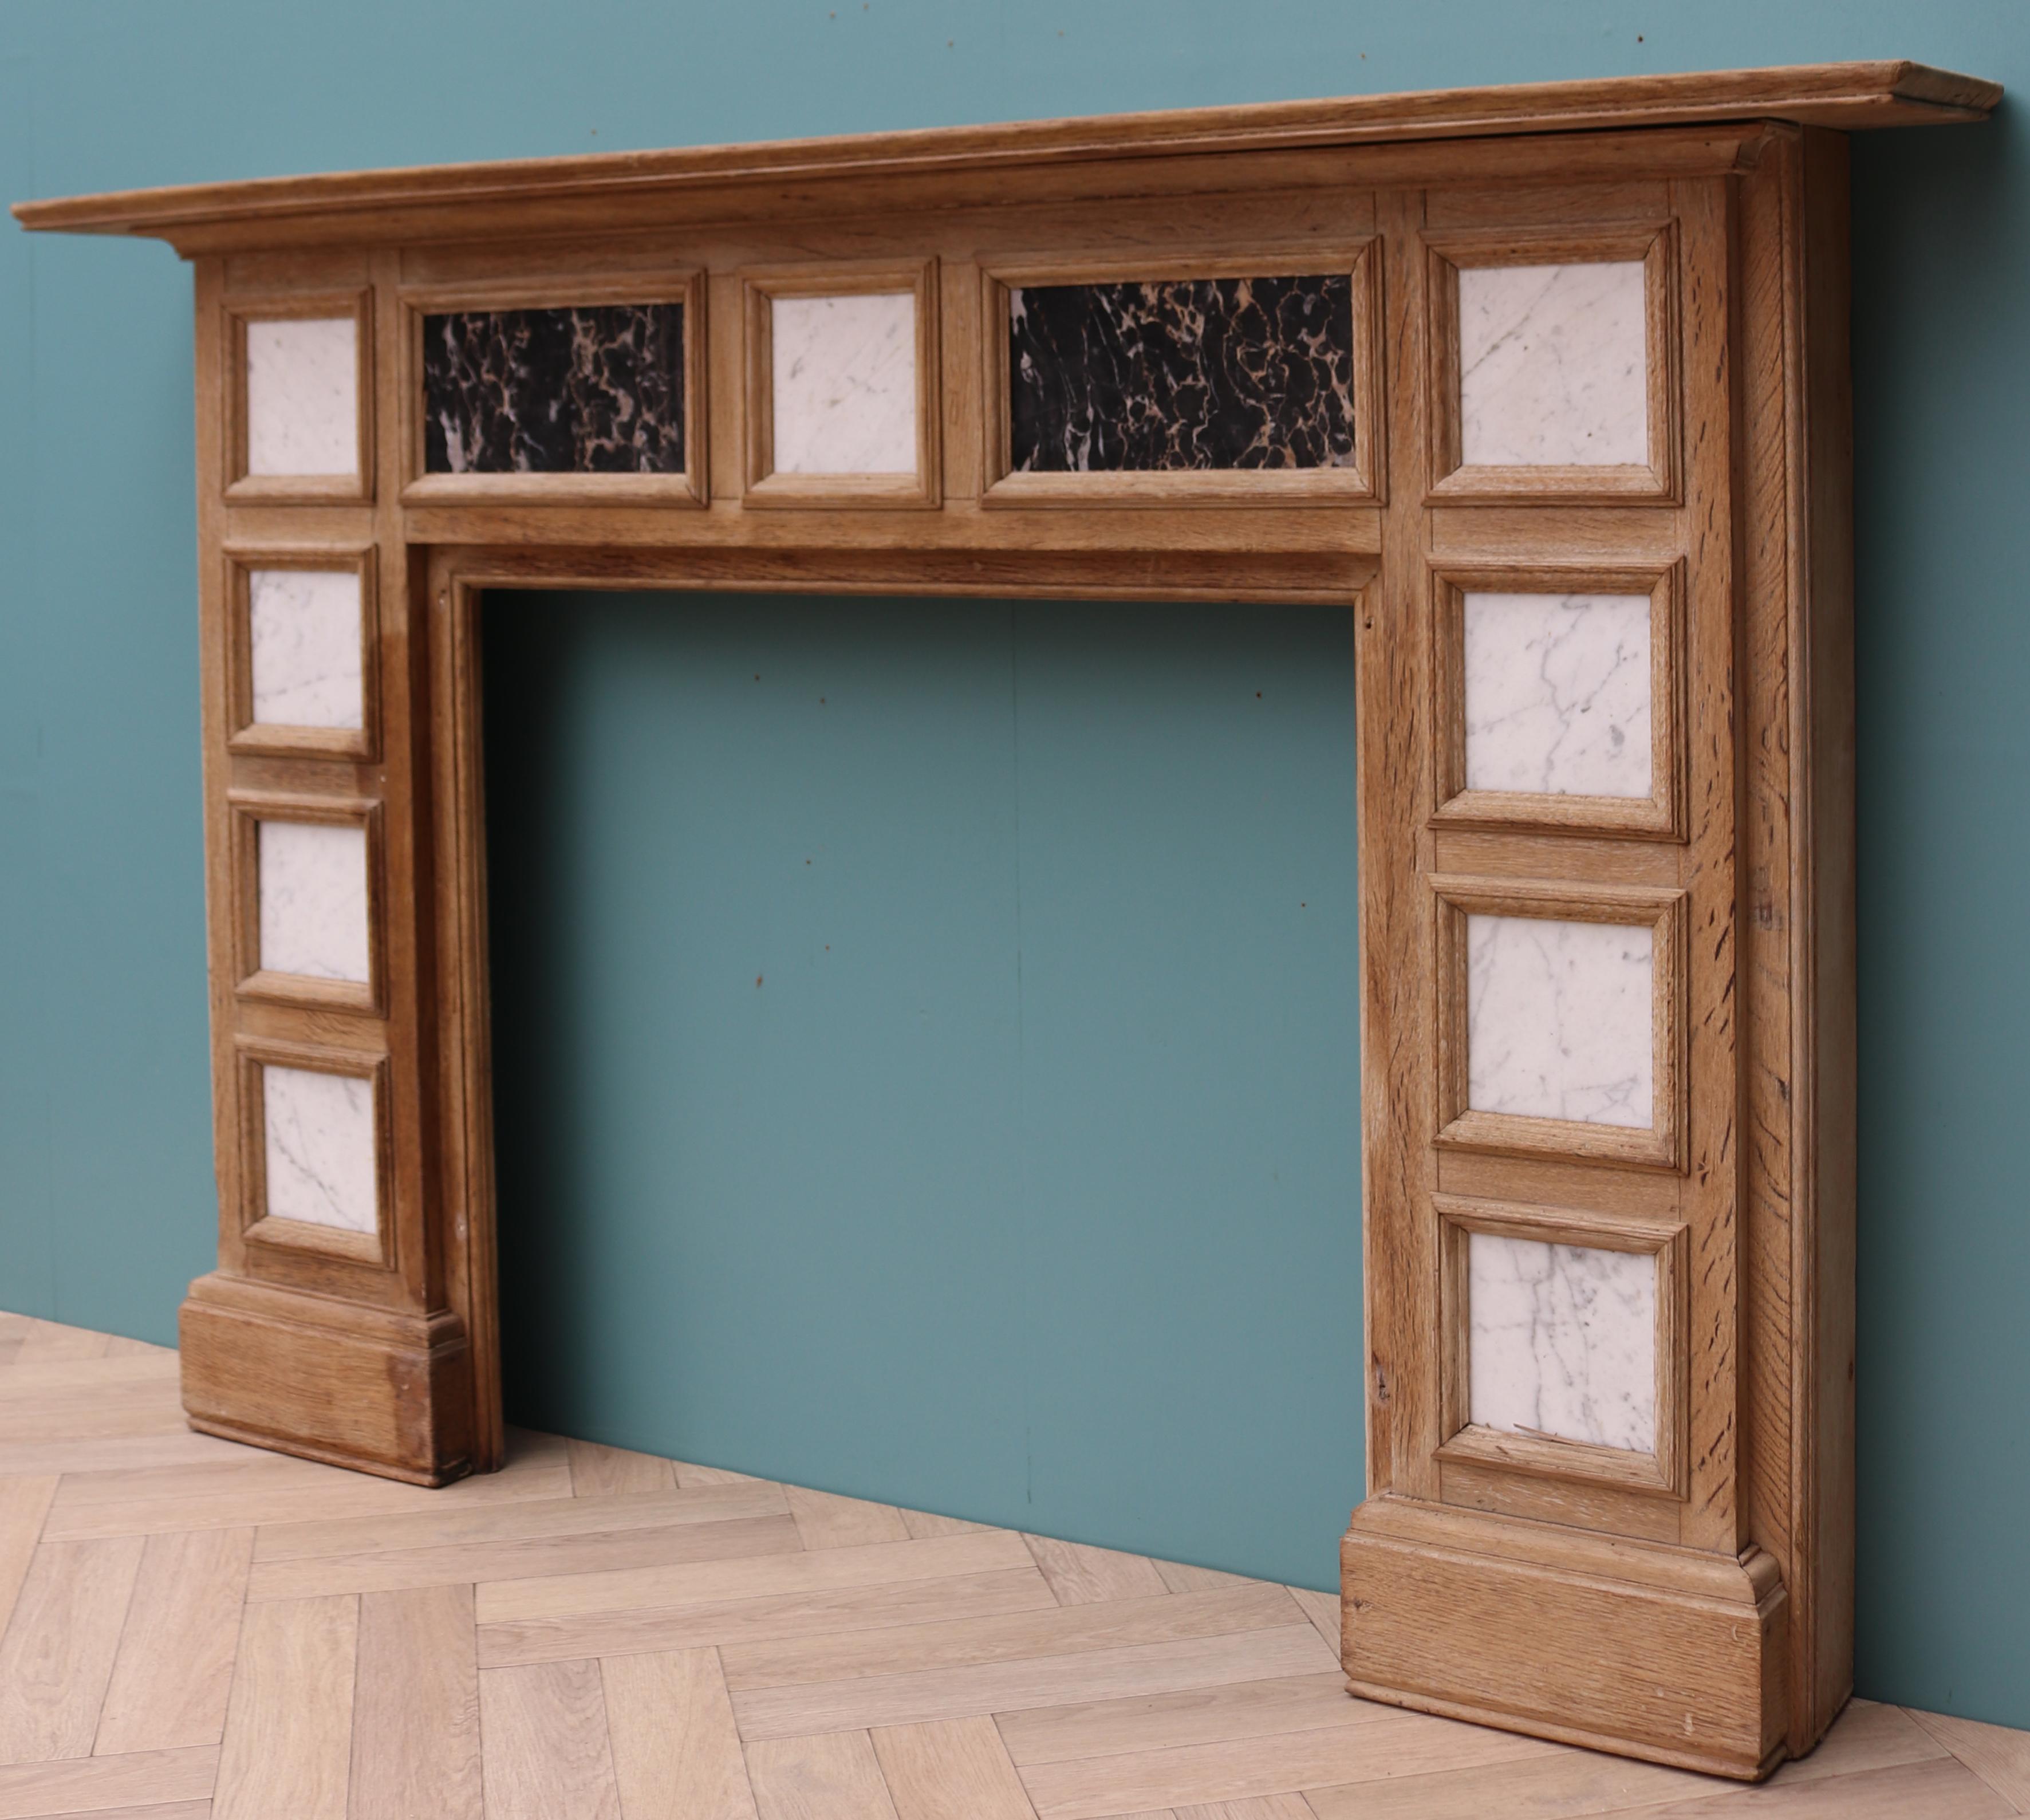 A reclaimed oak fire surround inset with white Carrara and black and gold Portoro marble panels.

Additional Dimensions:

Opening Height 79.5 cm

Opening Width 86.5 cm

Width between outside of foot blocks 154 cm.